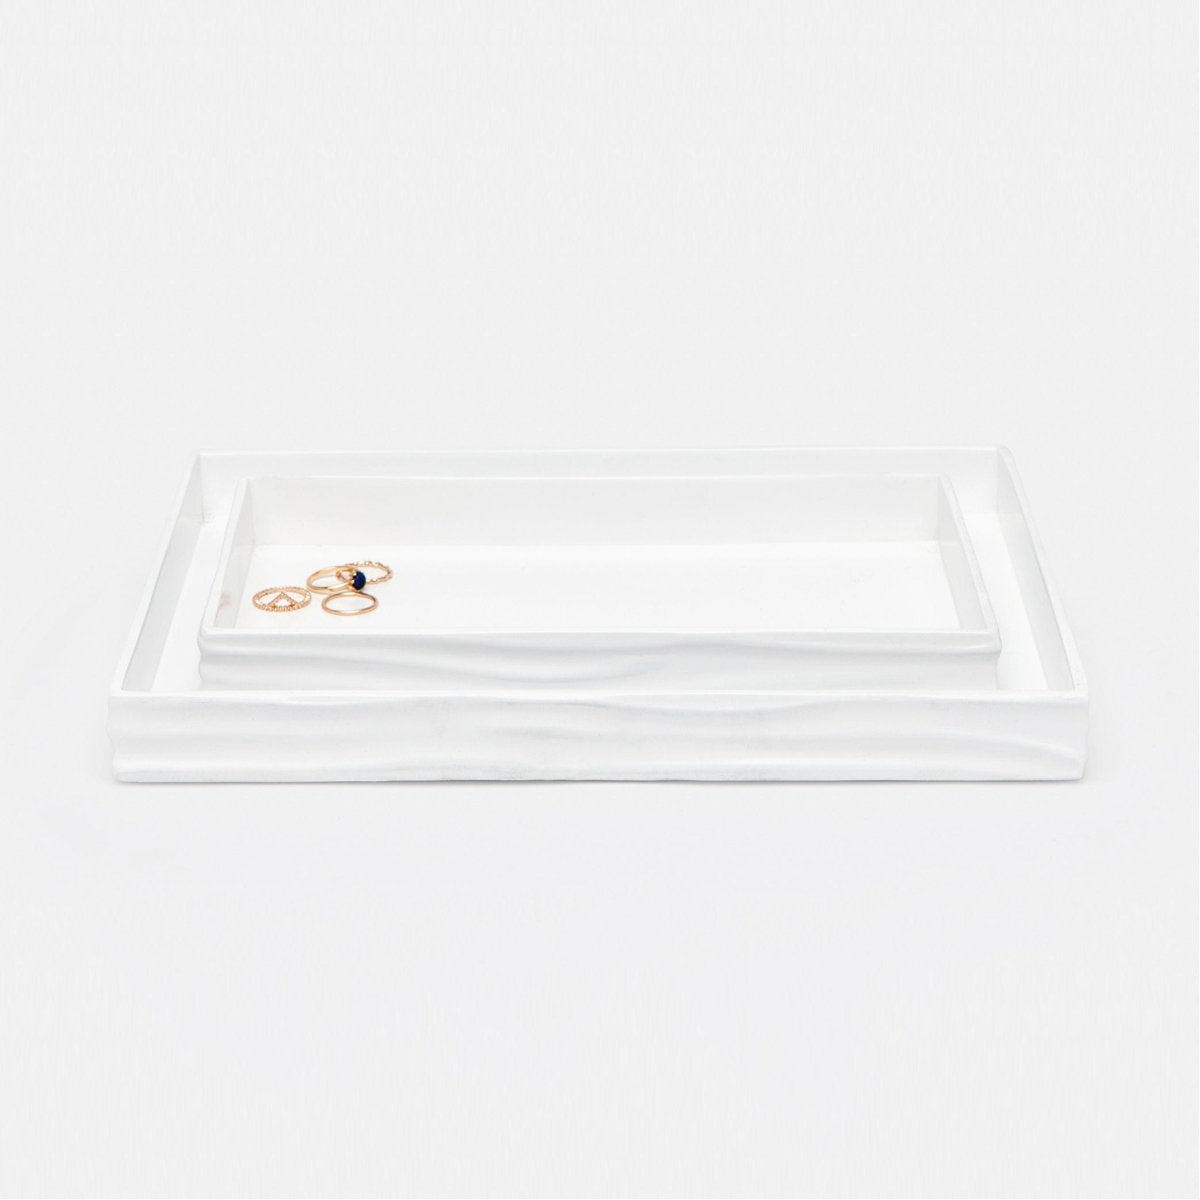 Pigeon and Poodle Solin Rectangular Tray - Straight, 2-Piece Set